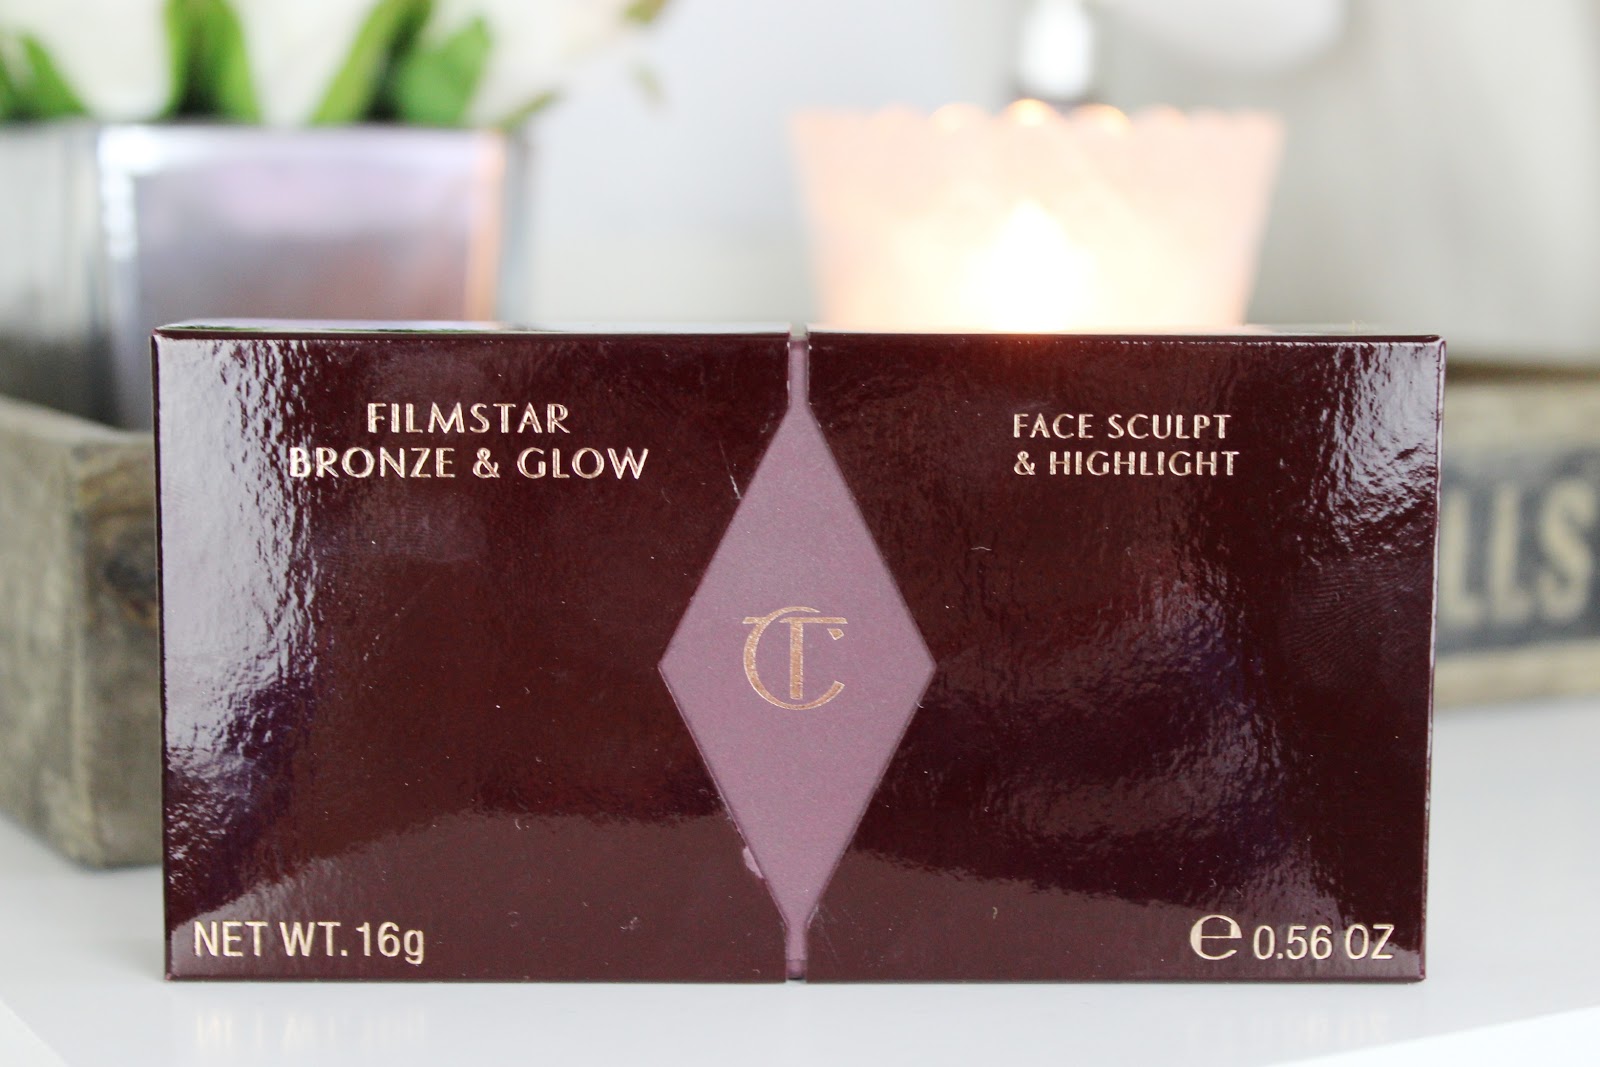 The outter packaging of the Charlotte Tilbury Filmstar Bronze & Glow